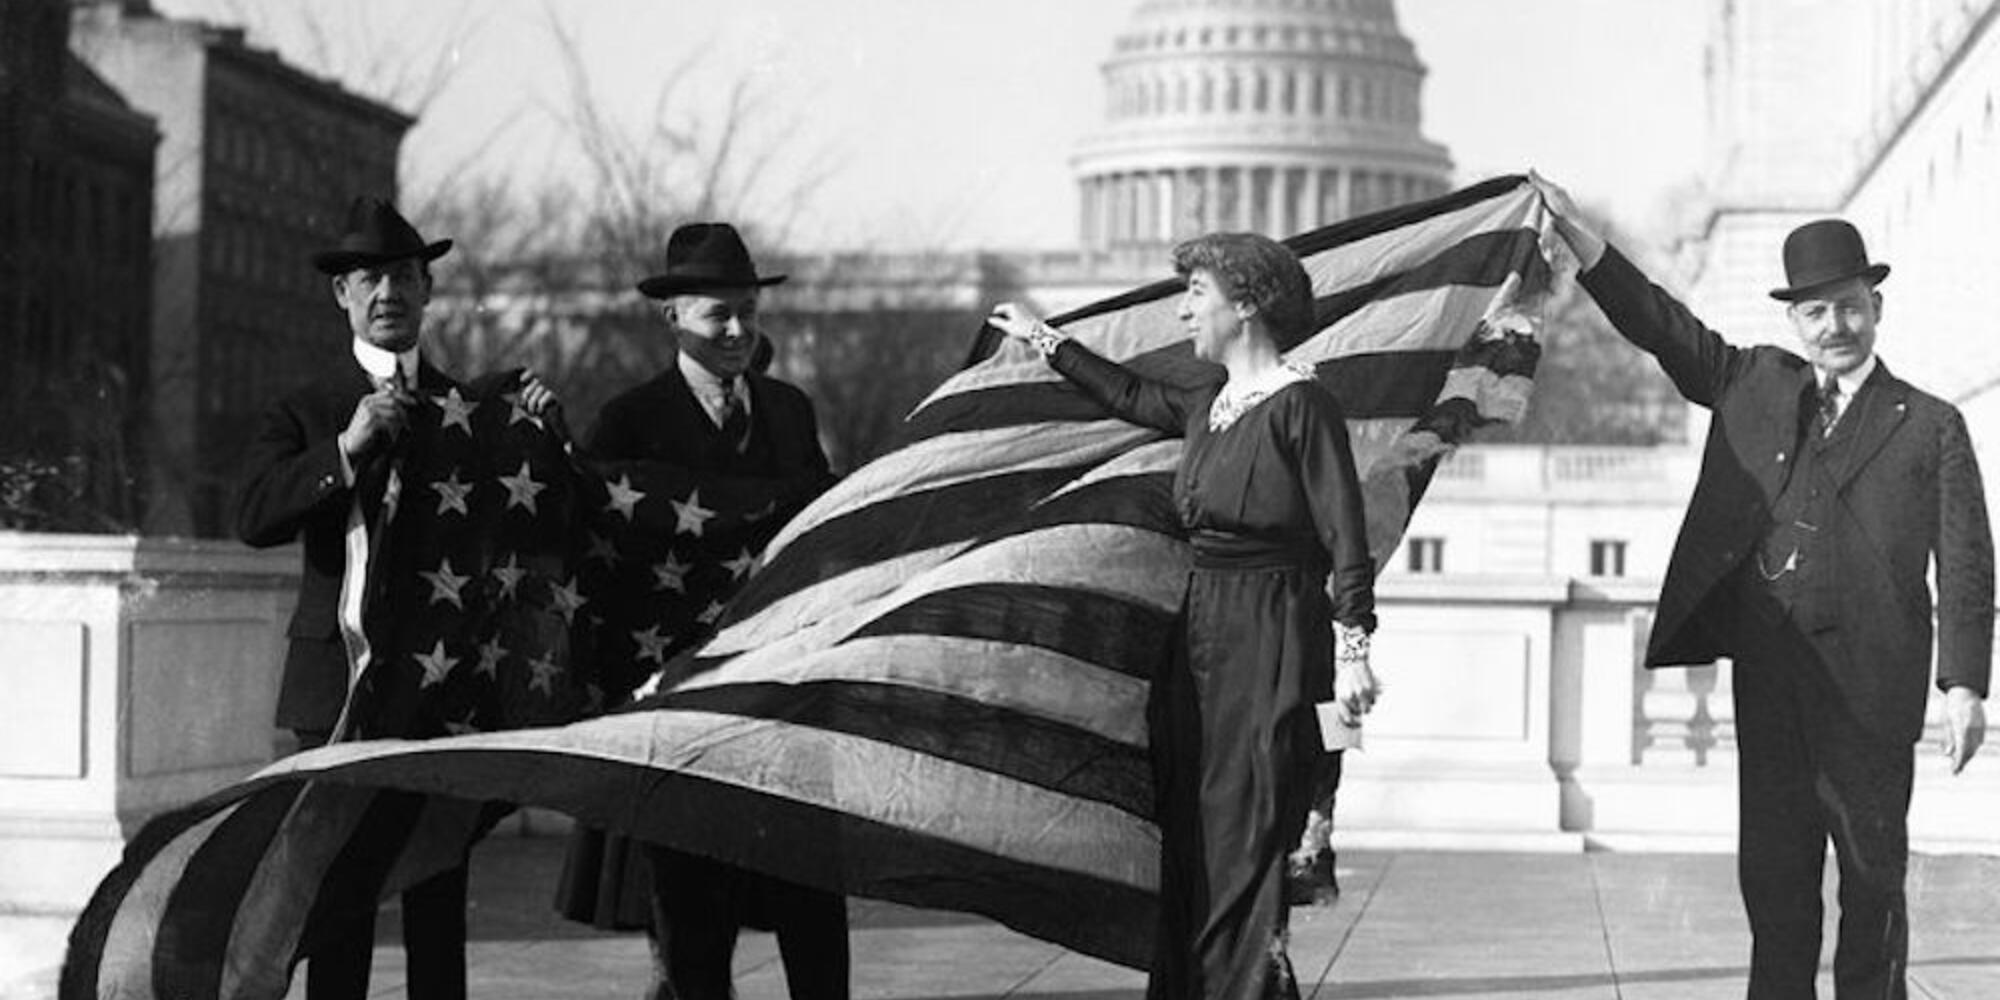  Jeanette Rankin, first Woman elected to Congress, receiving the flag of the House of Representatives upon passage of women's suffrage.